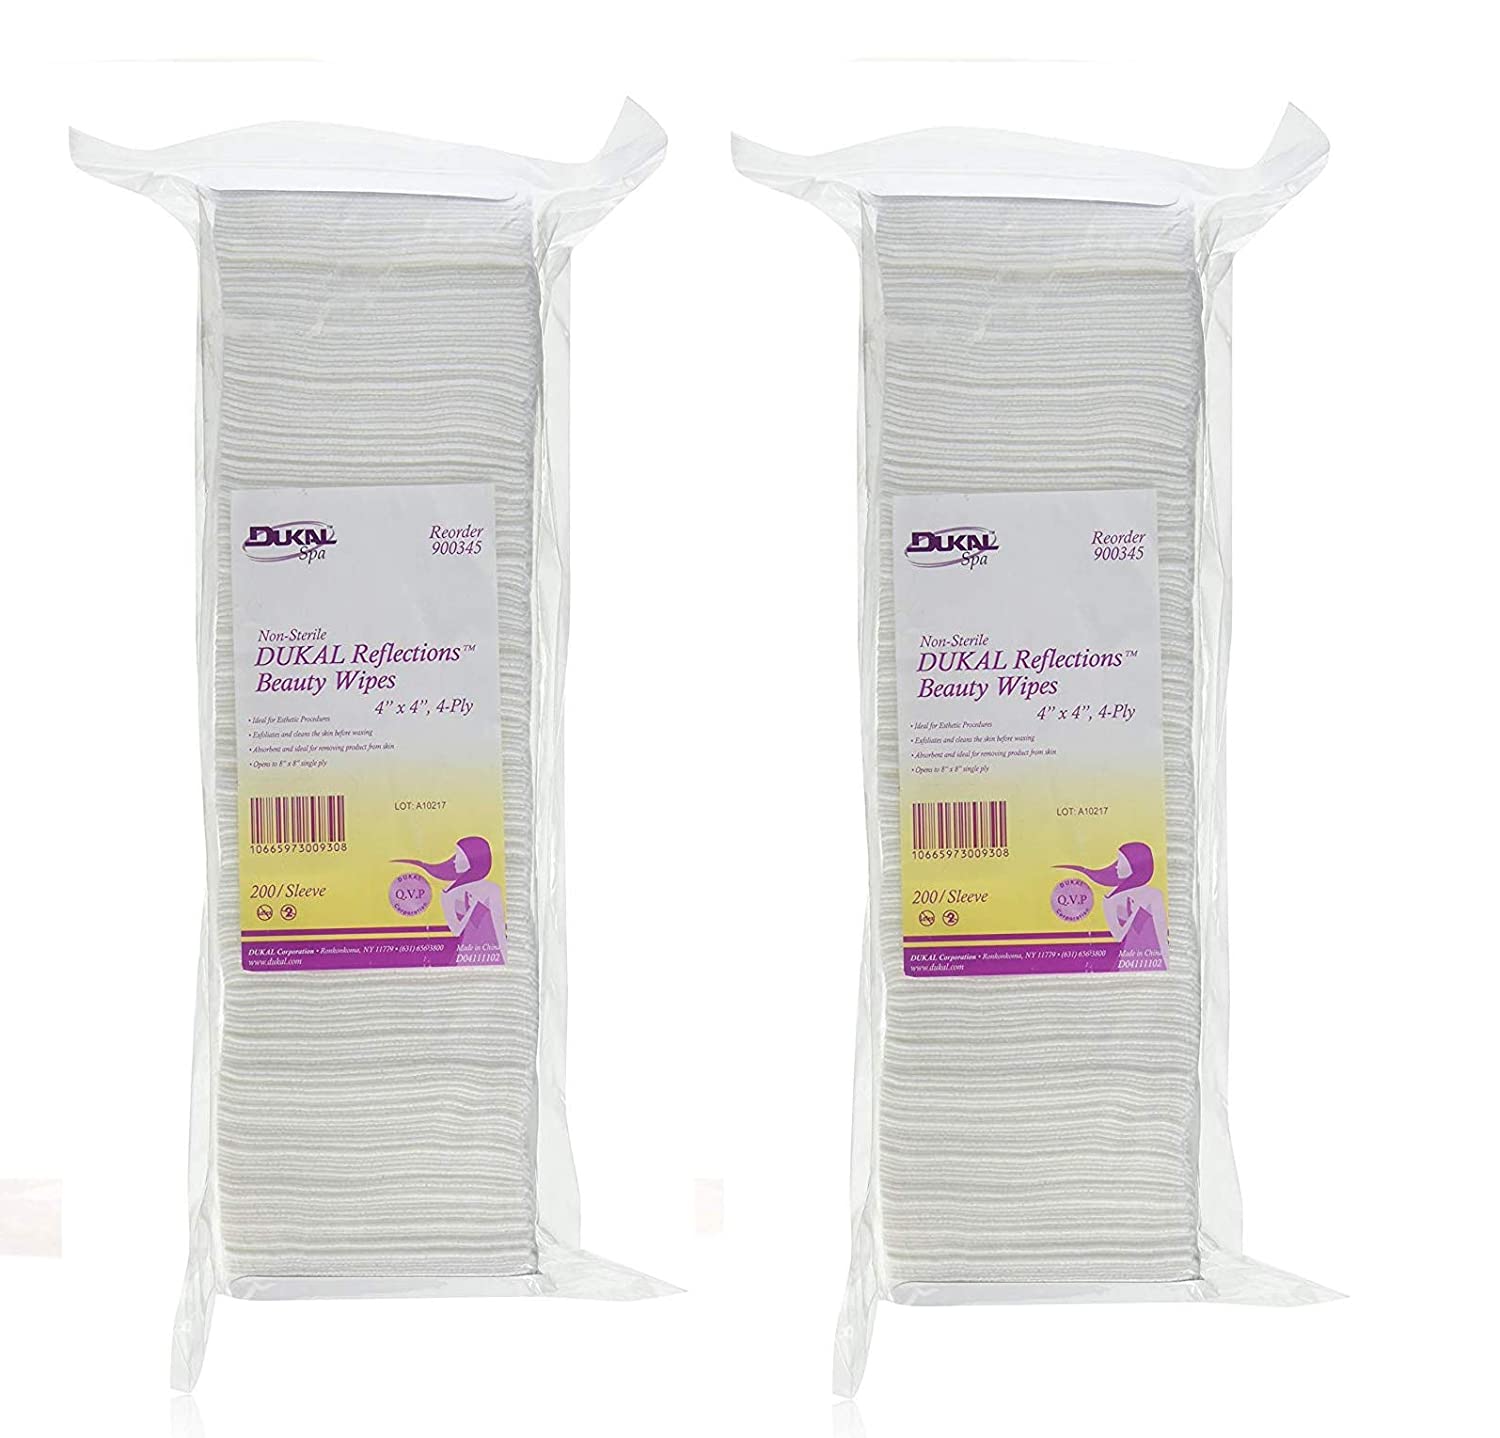 Non-Sterile - DUKAL Reflections Beauty Wipes - Latex Free (4-Ply) (4" x 4") - 200 count (2 Pack)